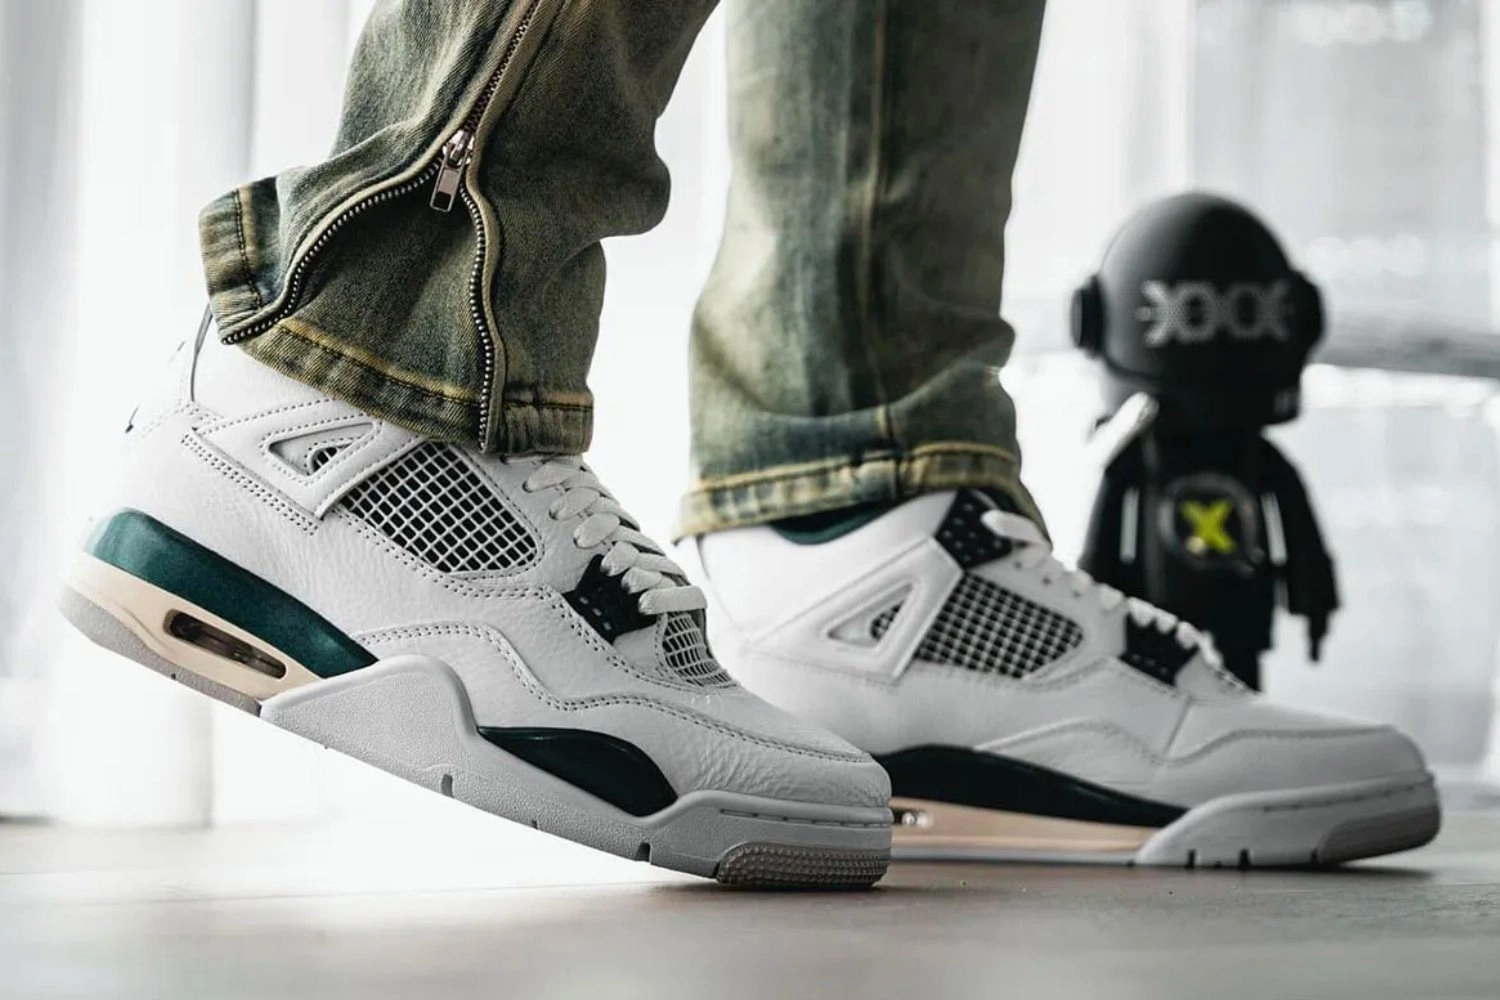 Let's take a detailed look at the Air Jordan 4 'Oxidized Green'